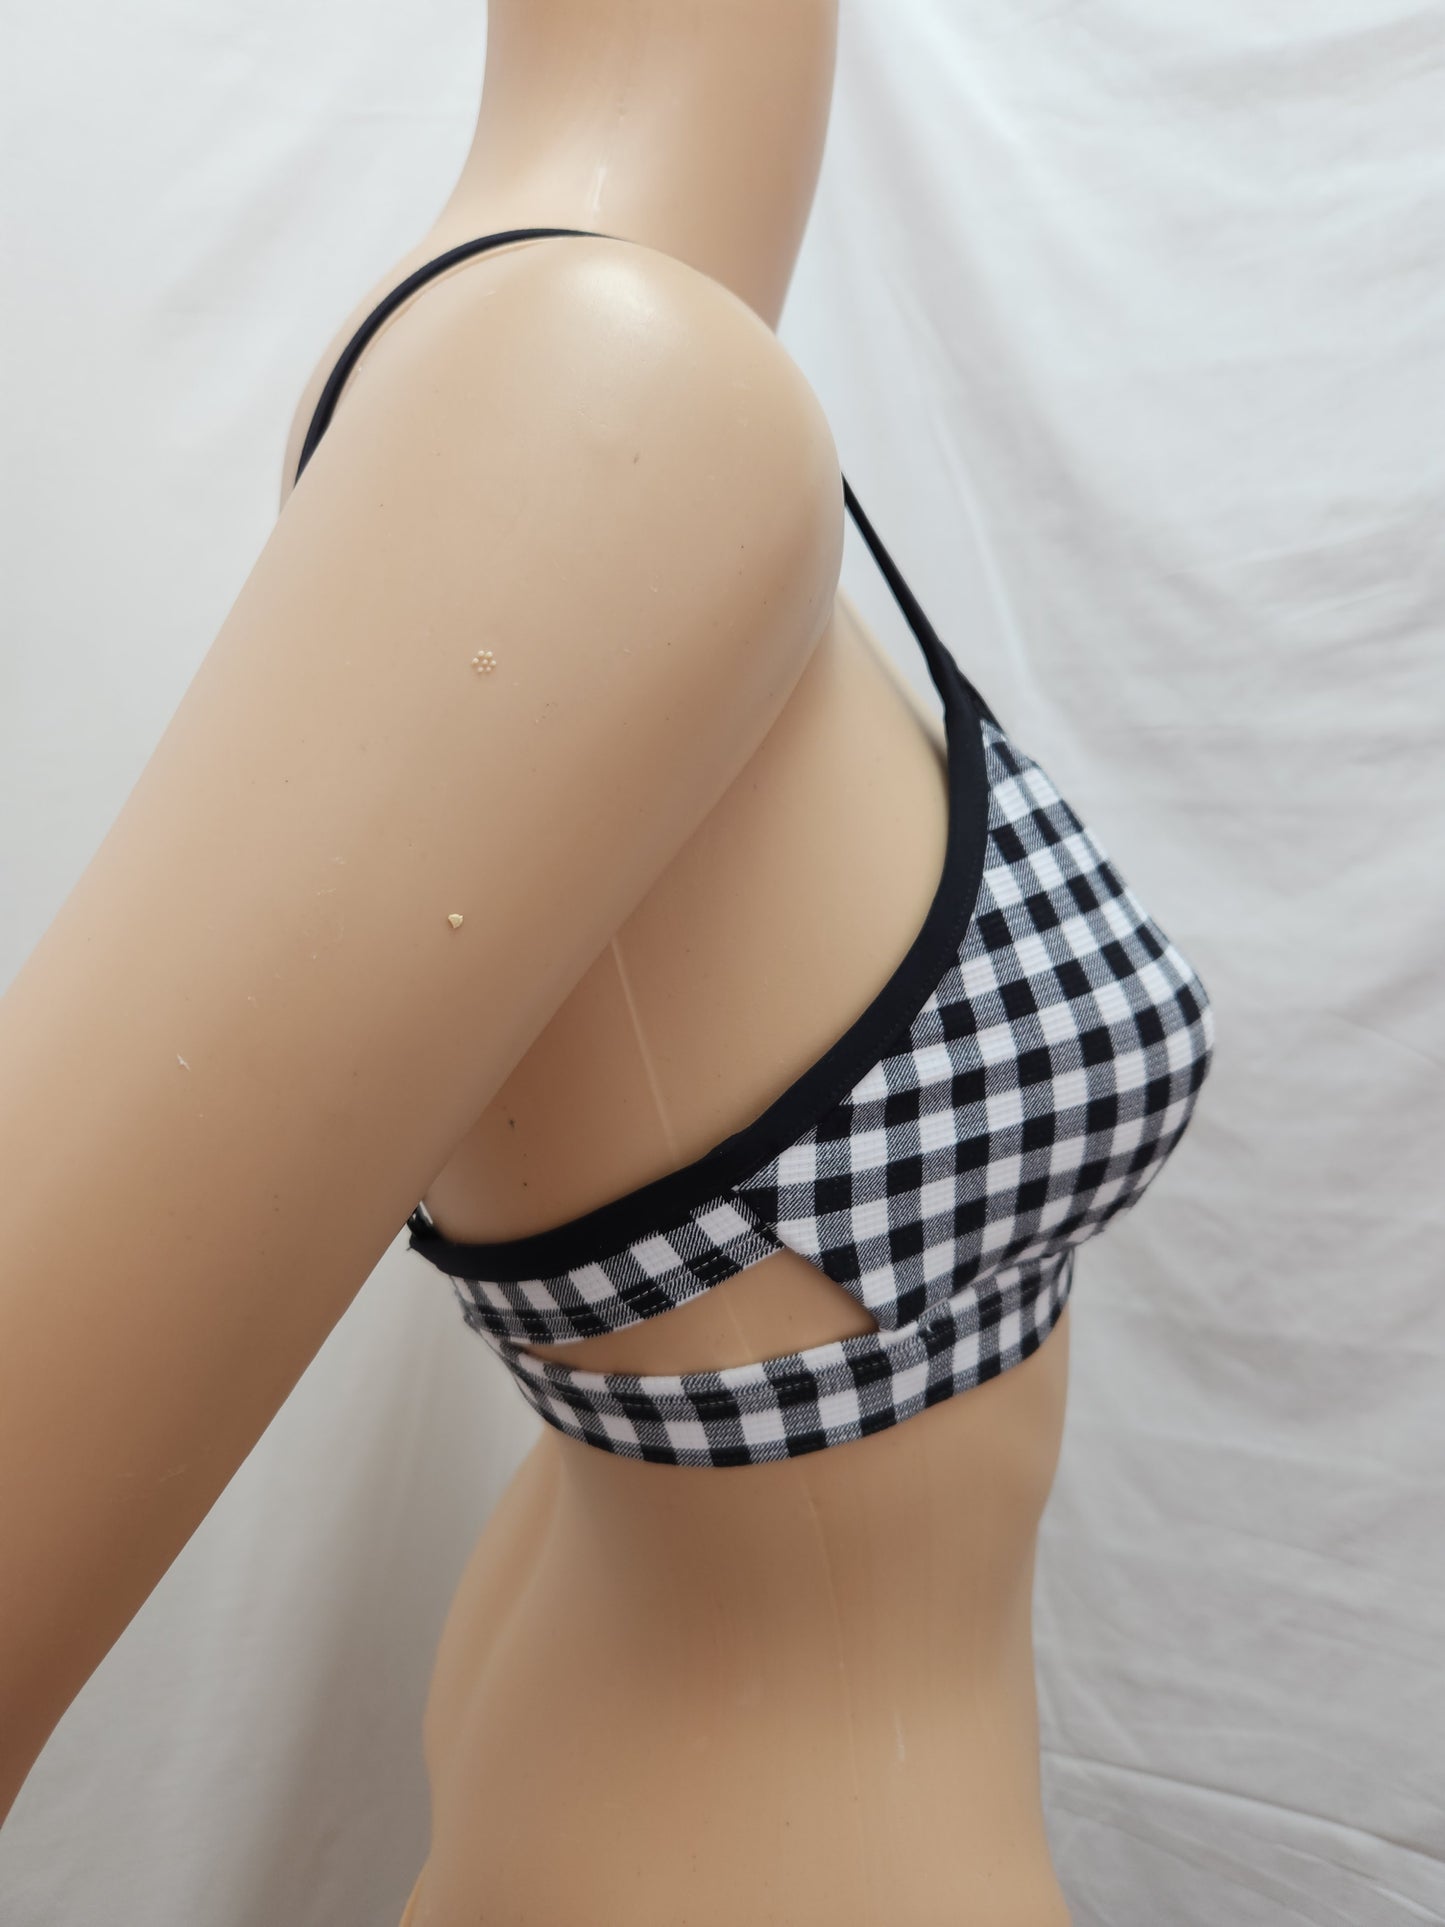 NWT - ANTHROPOLOGIE Seafolly Black White ChecK Swimsuit Top - US 6